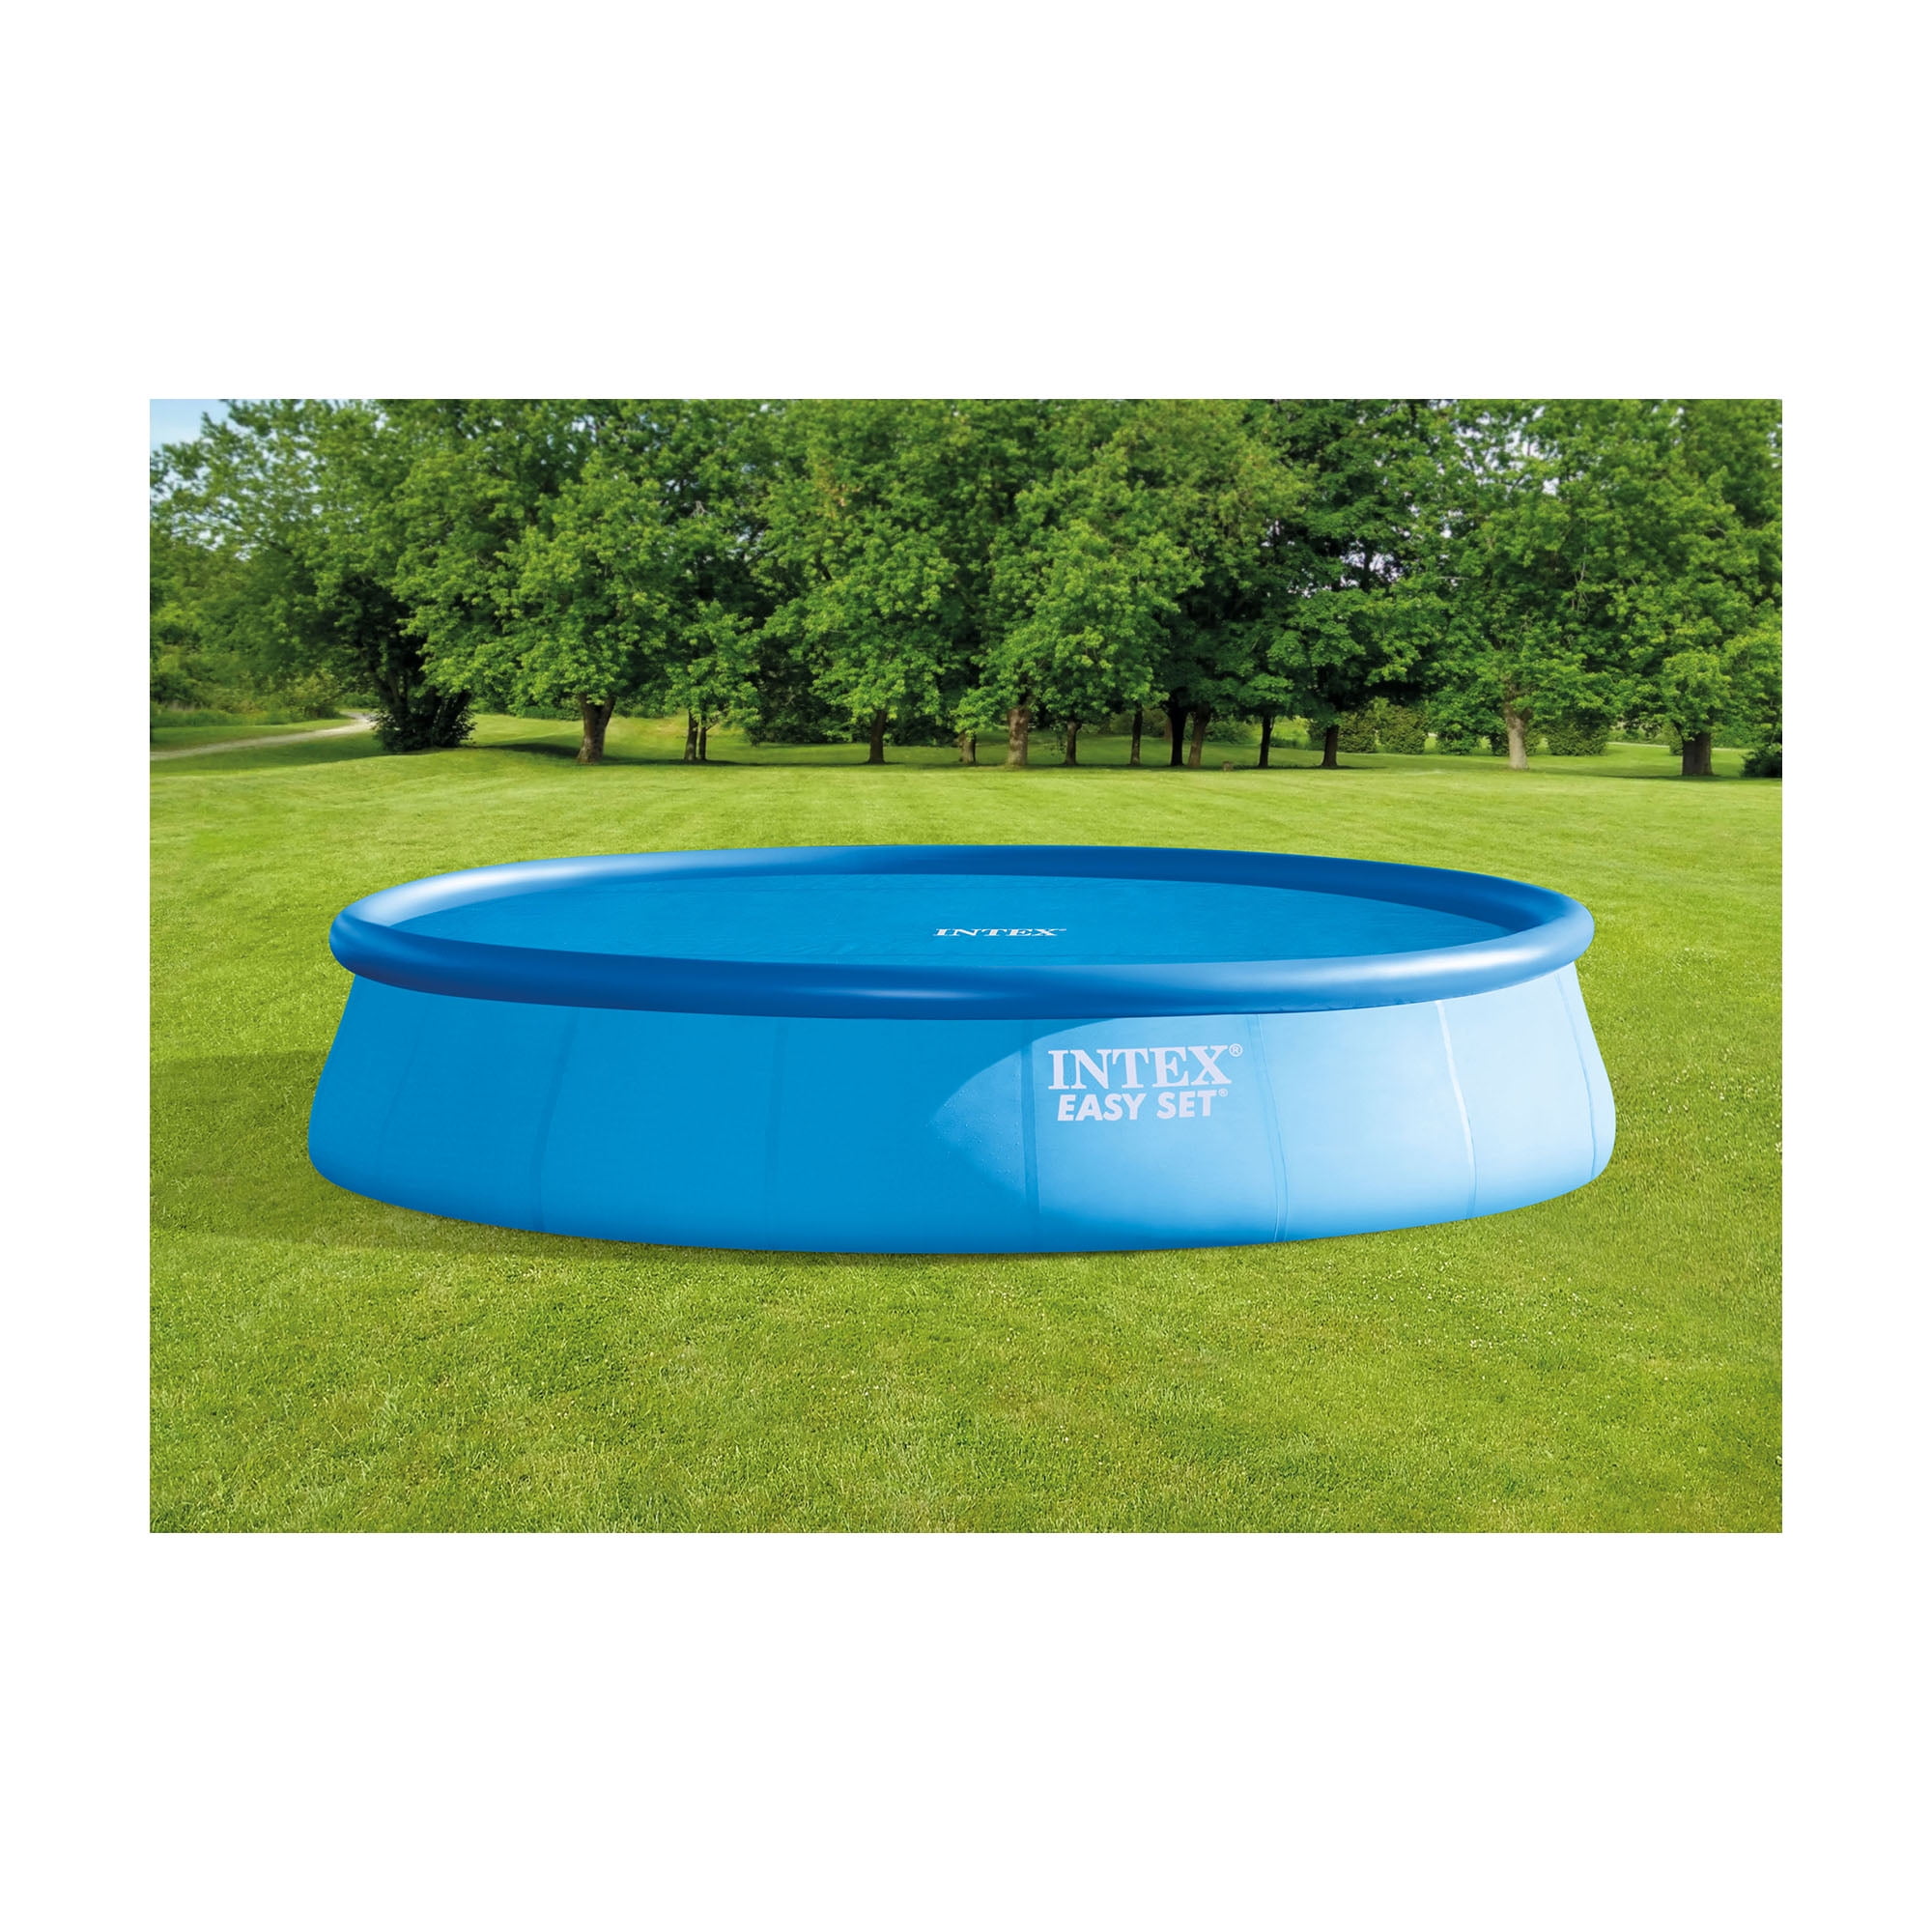 Intex 29022E Solar Cover for 12ft Diameter Easy Set and Frame Pools for sale online 